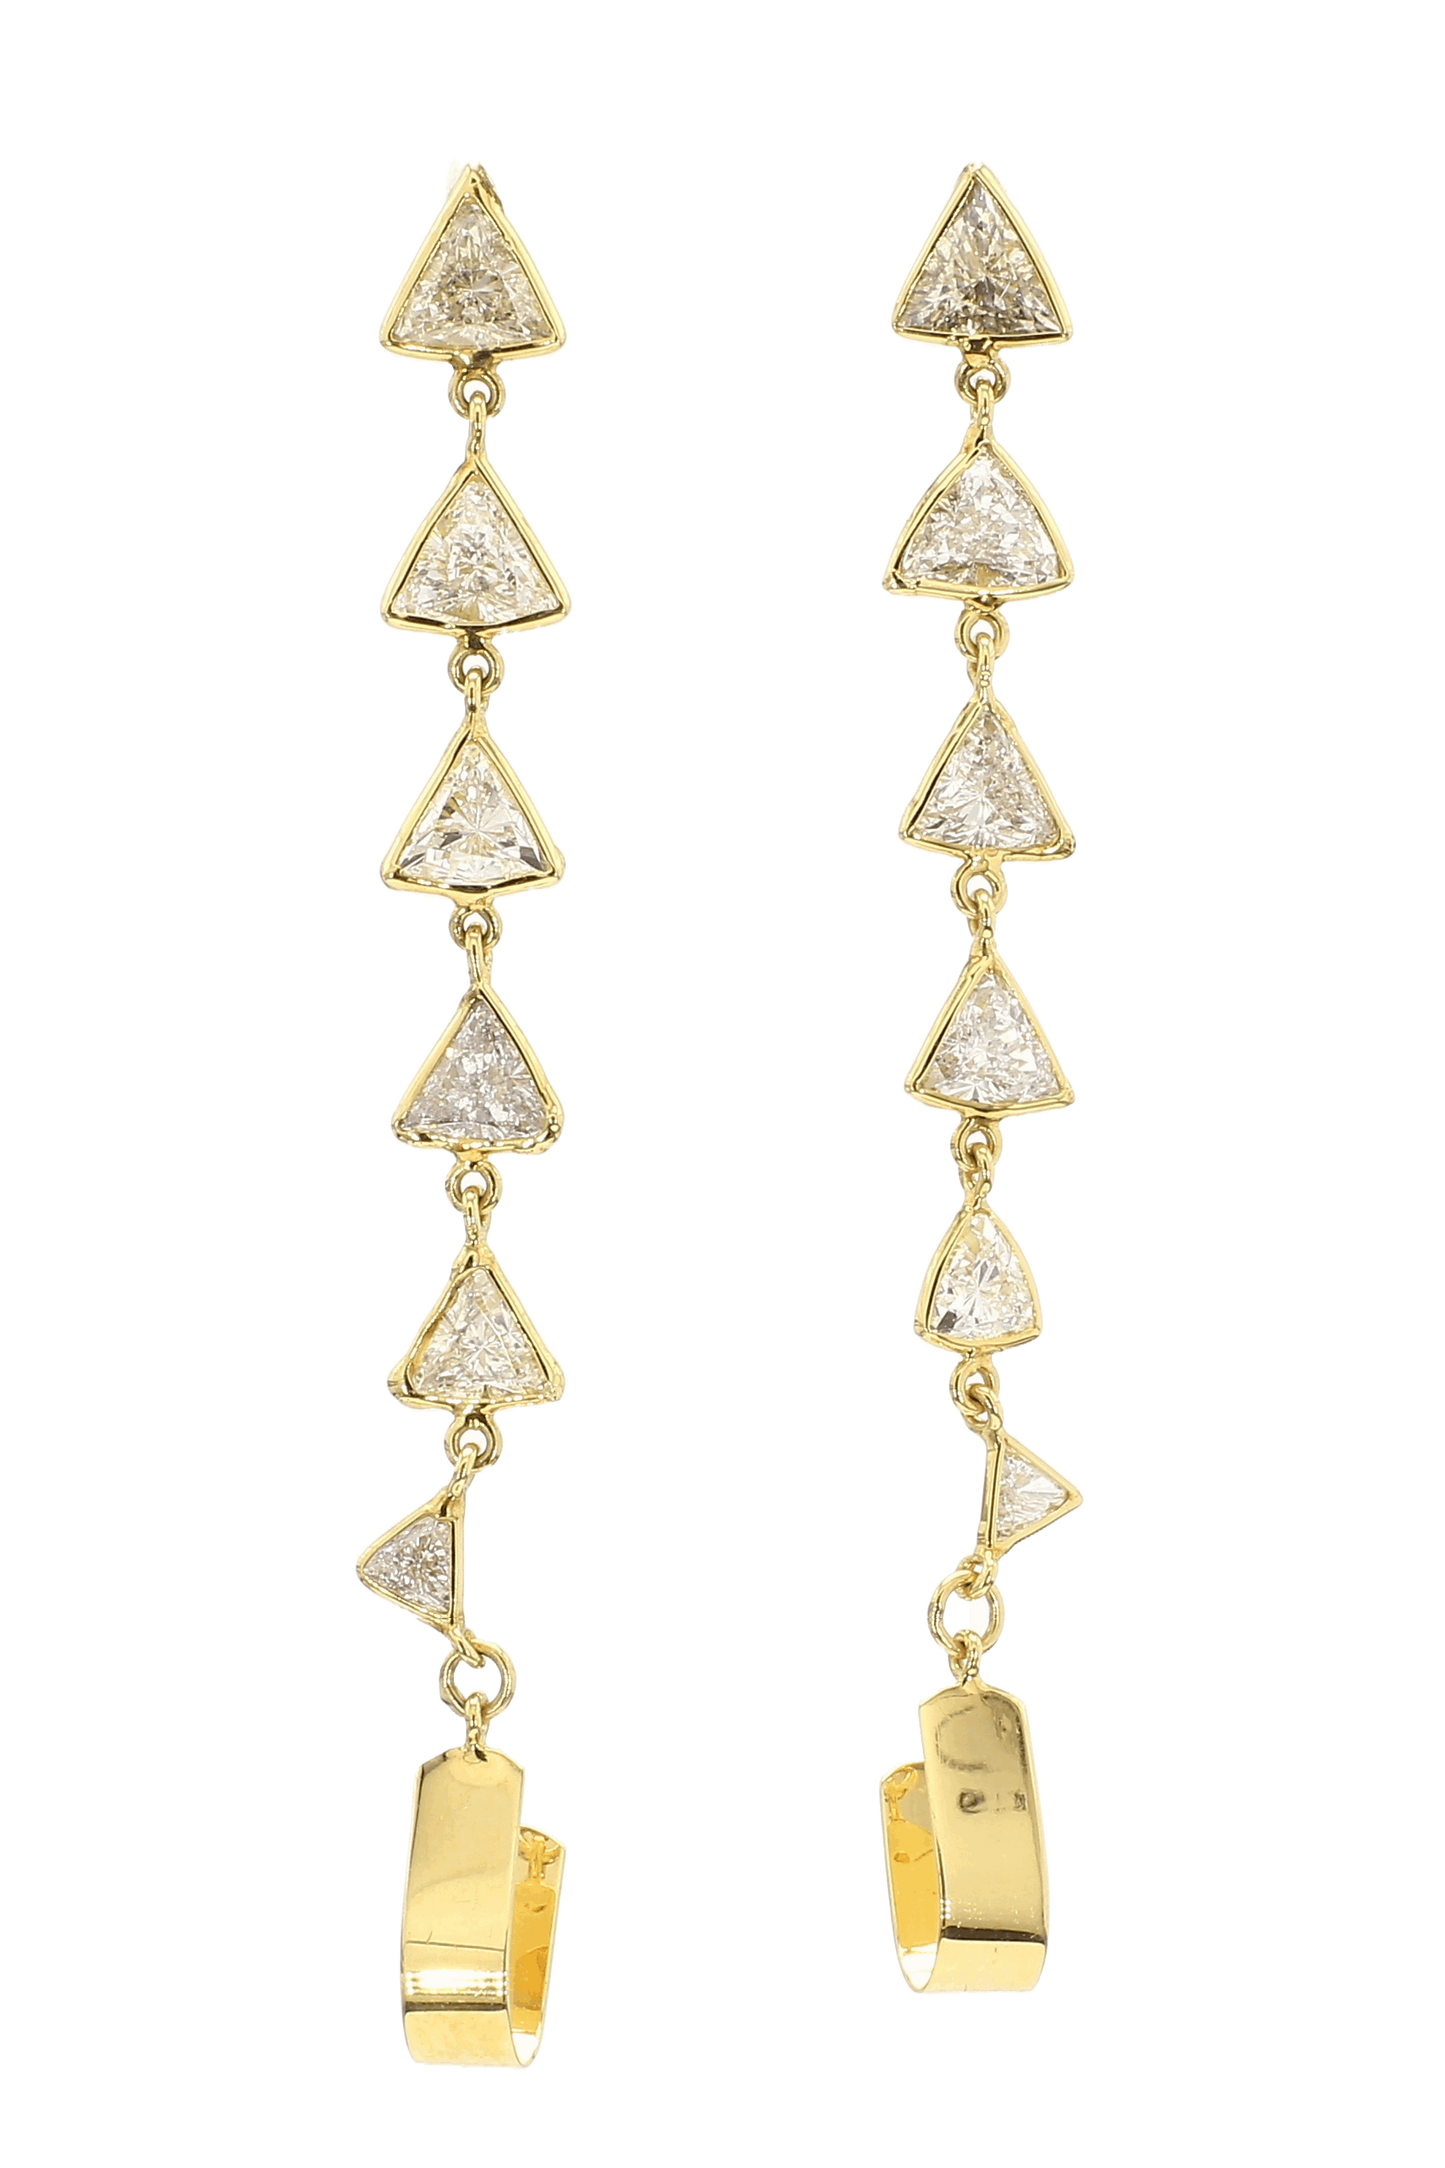 LIGHT YELLOW COLORED TRILLIANT SHAPED DIAMONDS EARRINGS, 3.24 CTTW, 18KY